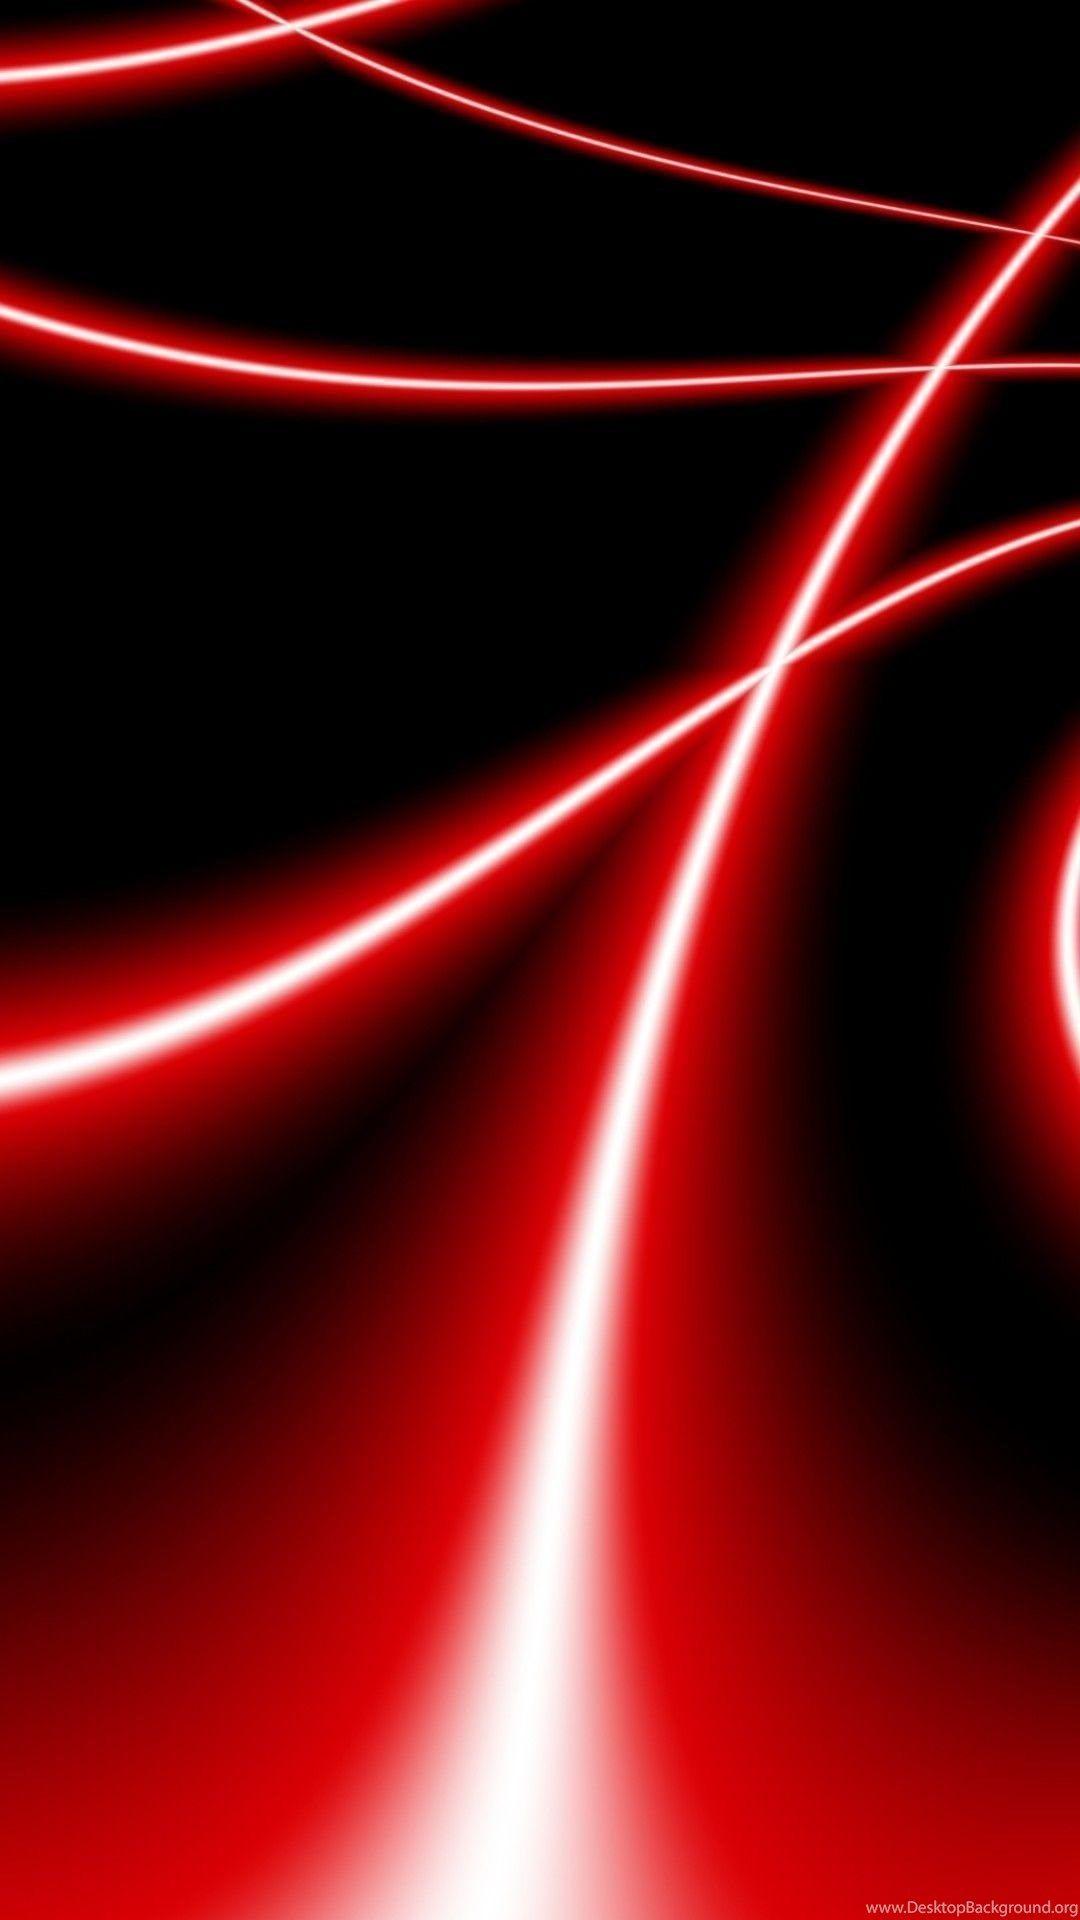 1080 X 1920 Red PC Wallpapers - Top Free 1080 X 1920 Red PC Backgrounds ...